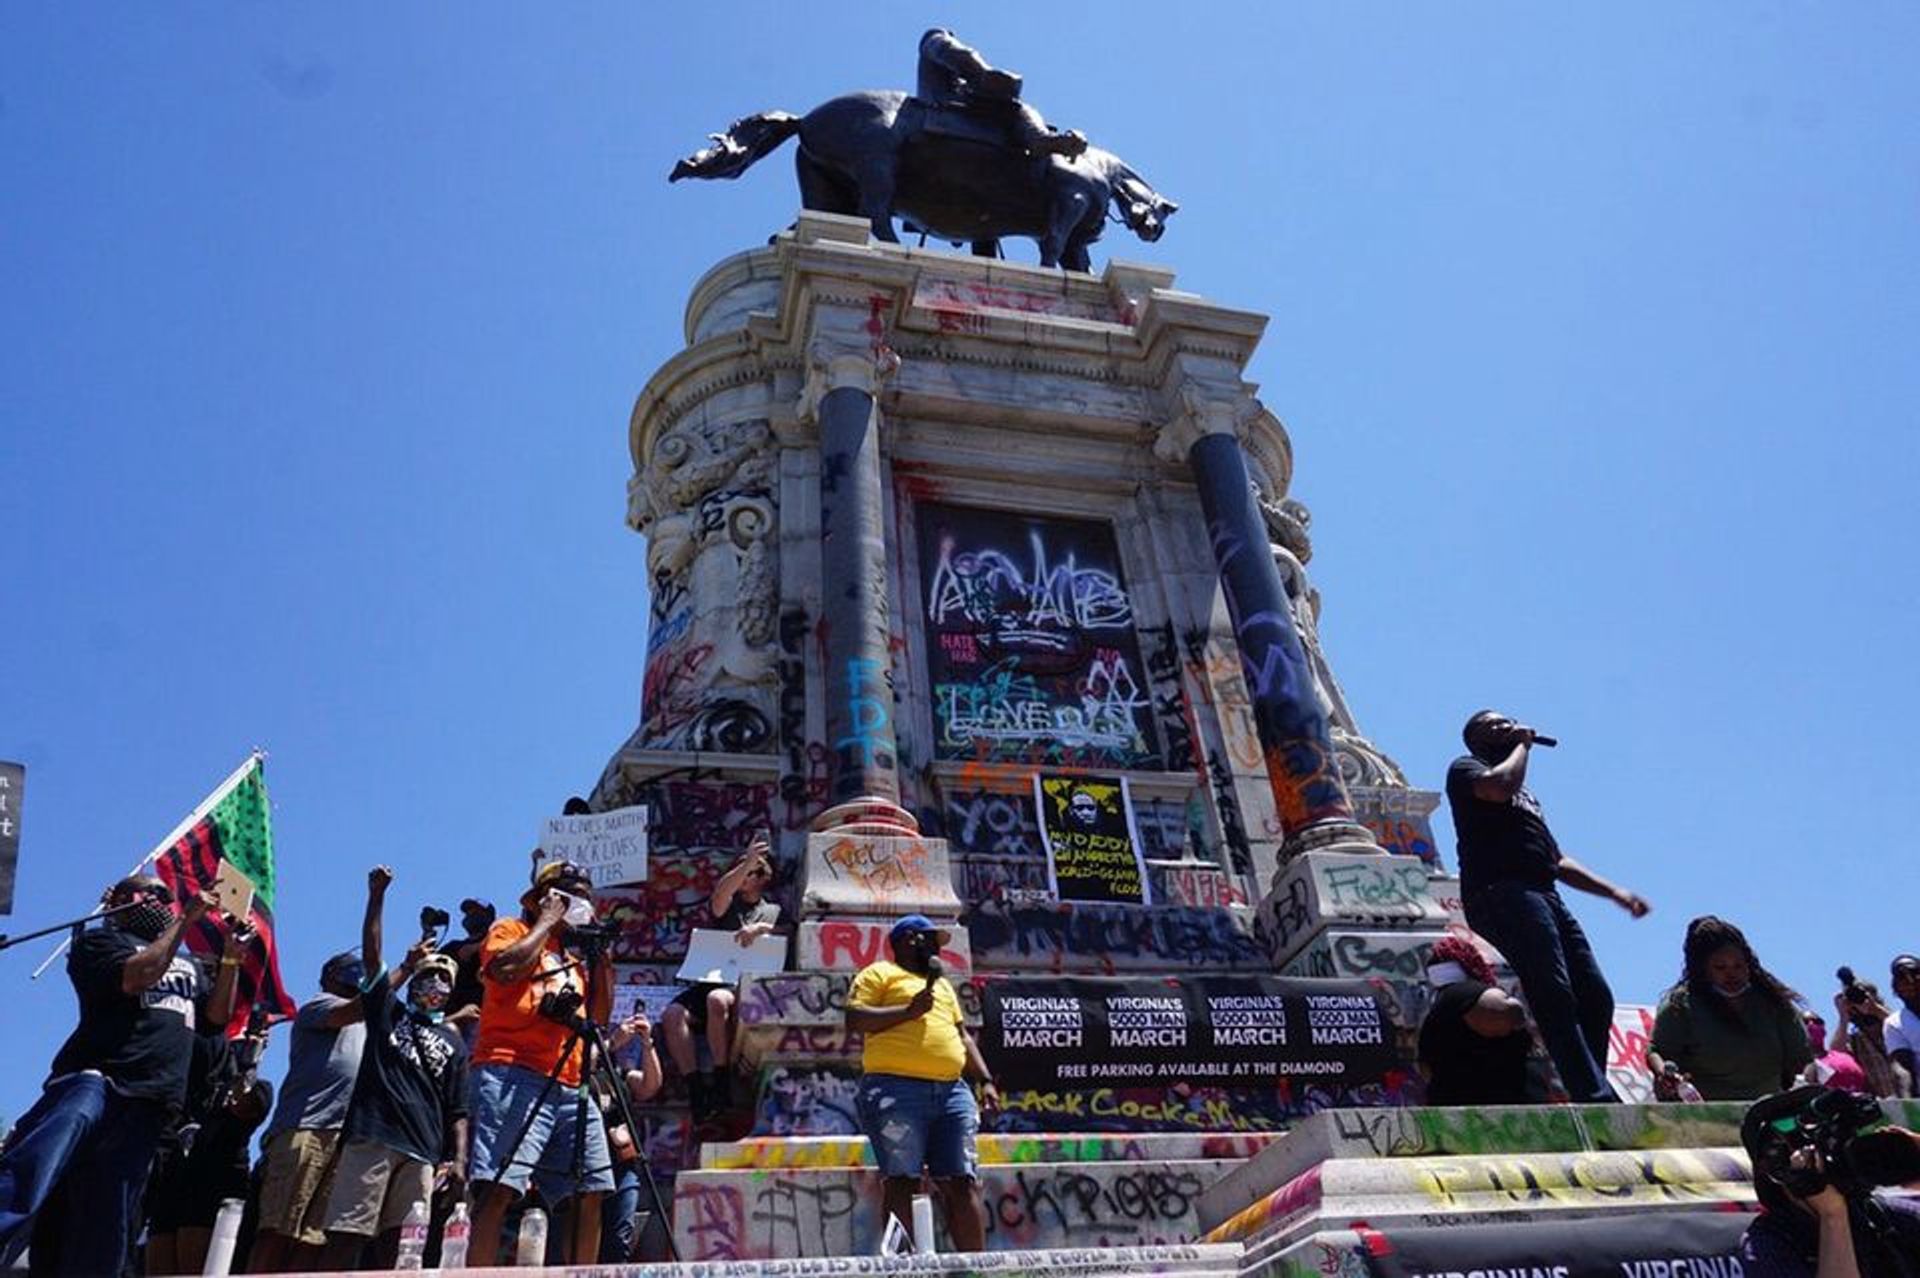 Protesters in Richmond, Virginia demonstrating against racial injustice and police brutality next to a statue of the Confederate general Robert E. Lee Artur Gabdrahmanov/Sputnik via Associated Press